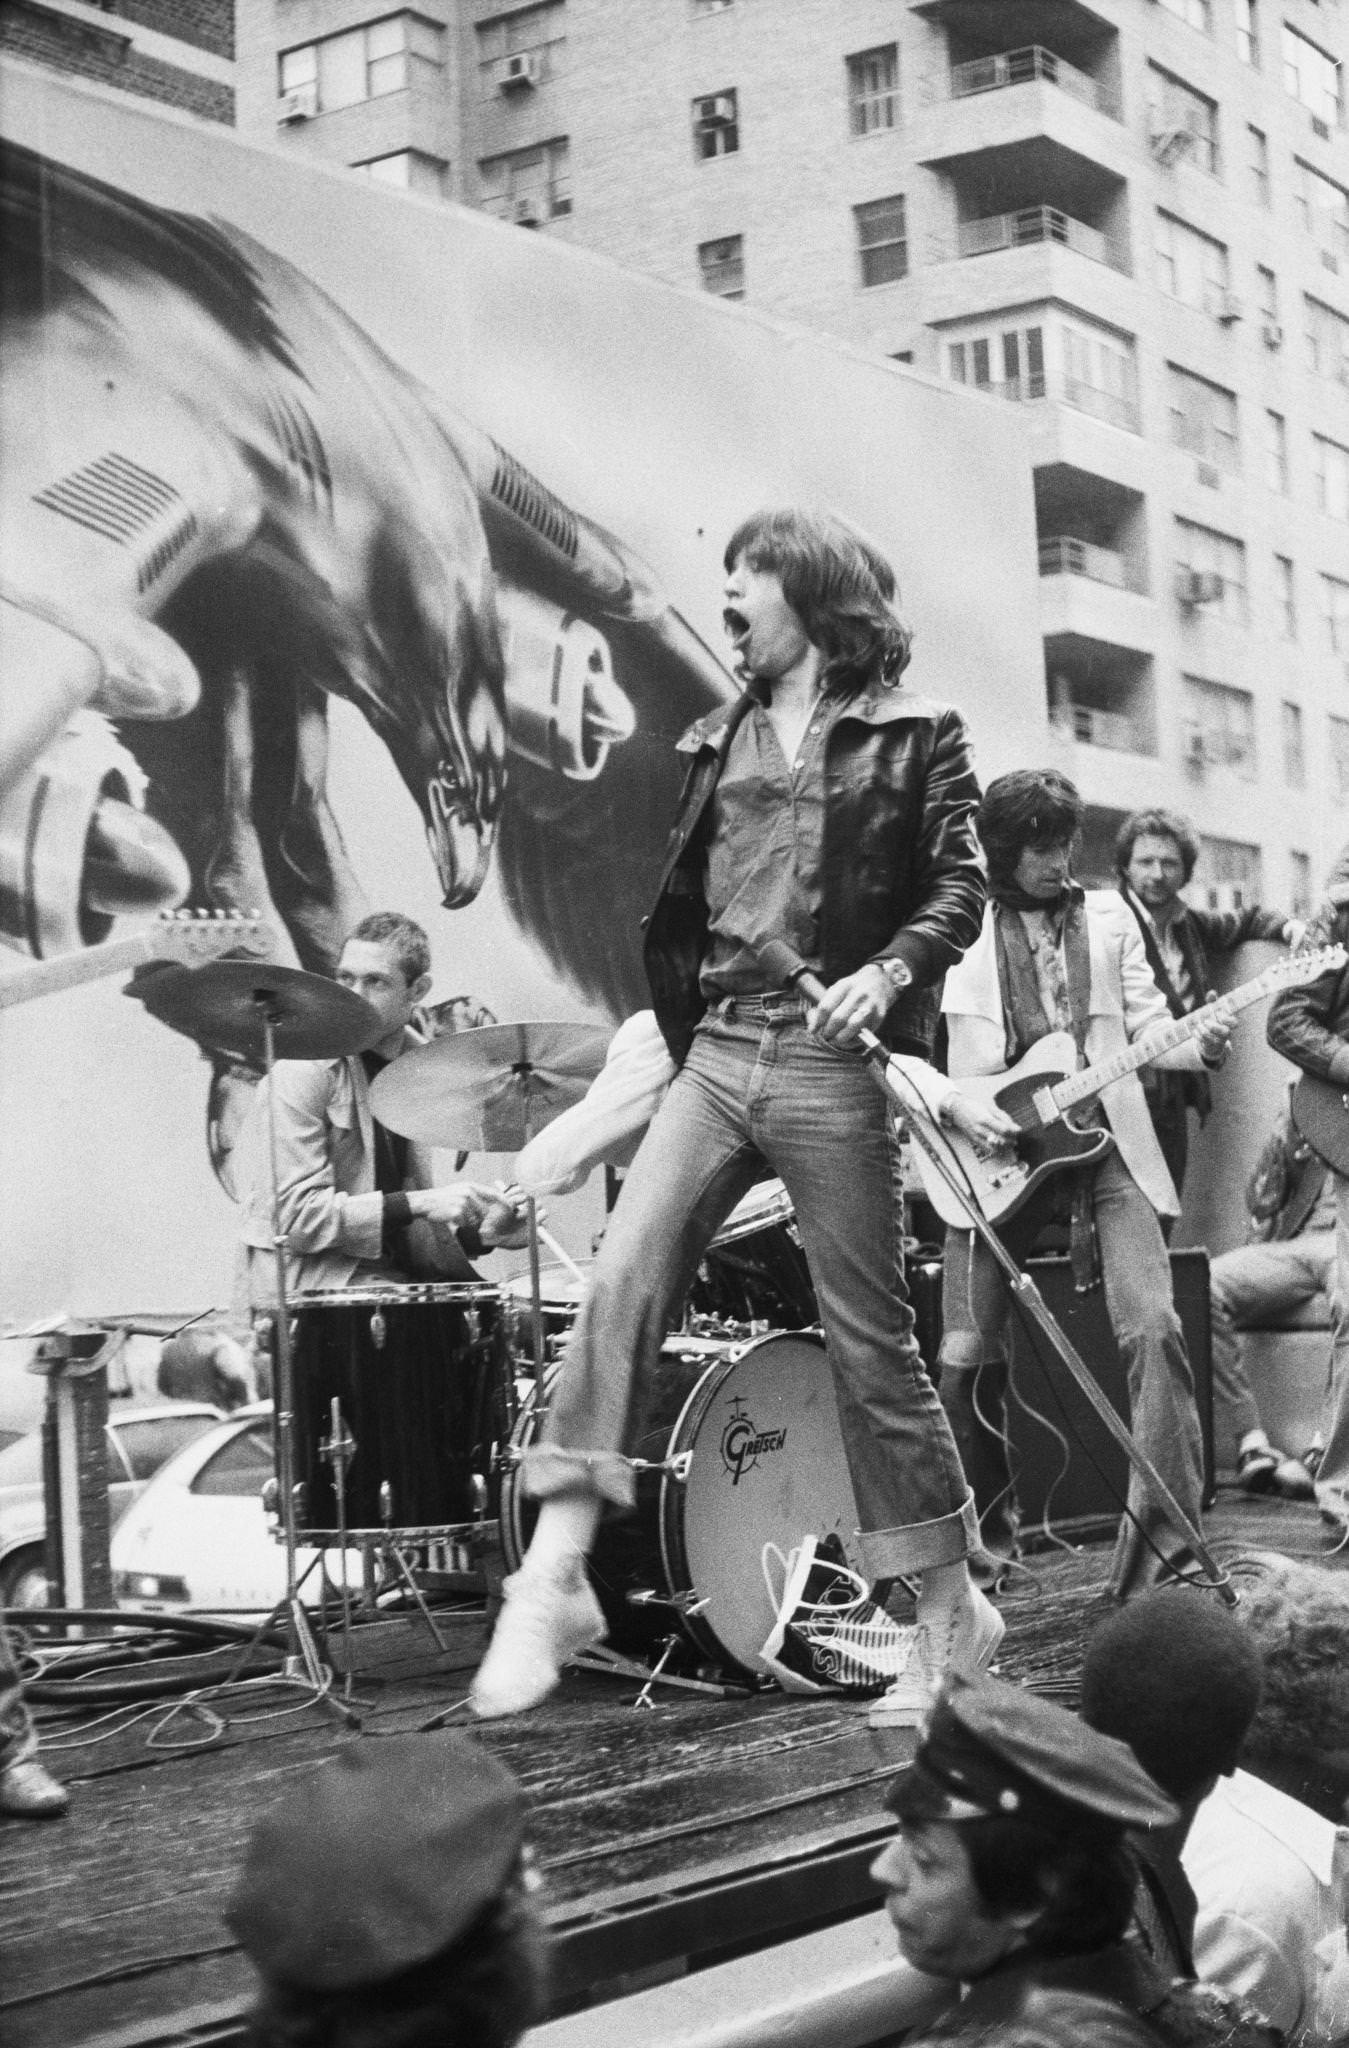 Charlie Watts, Mick Jagger, and Keith Richards perform on a flatbed truck on Fifth Avenue, New York City, 1975.